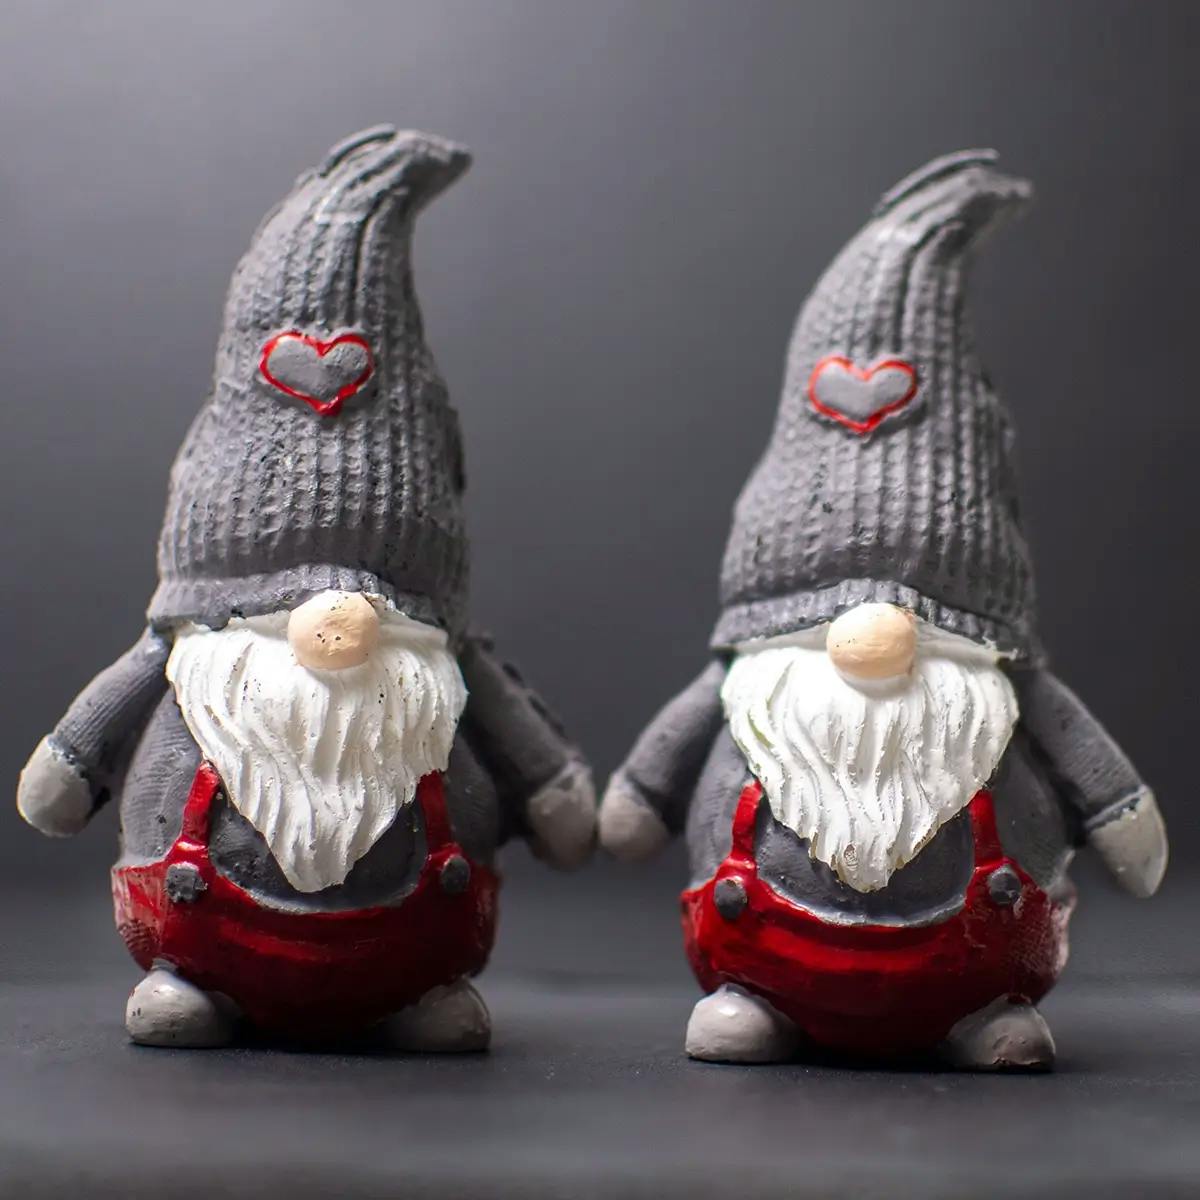 Two traditional Swedish gnomes representing the Tomte elfin spirits of Christmas.